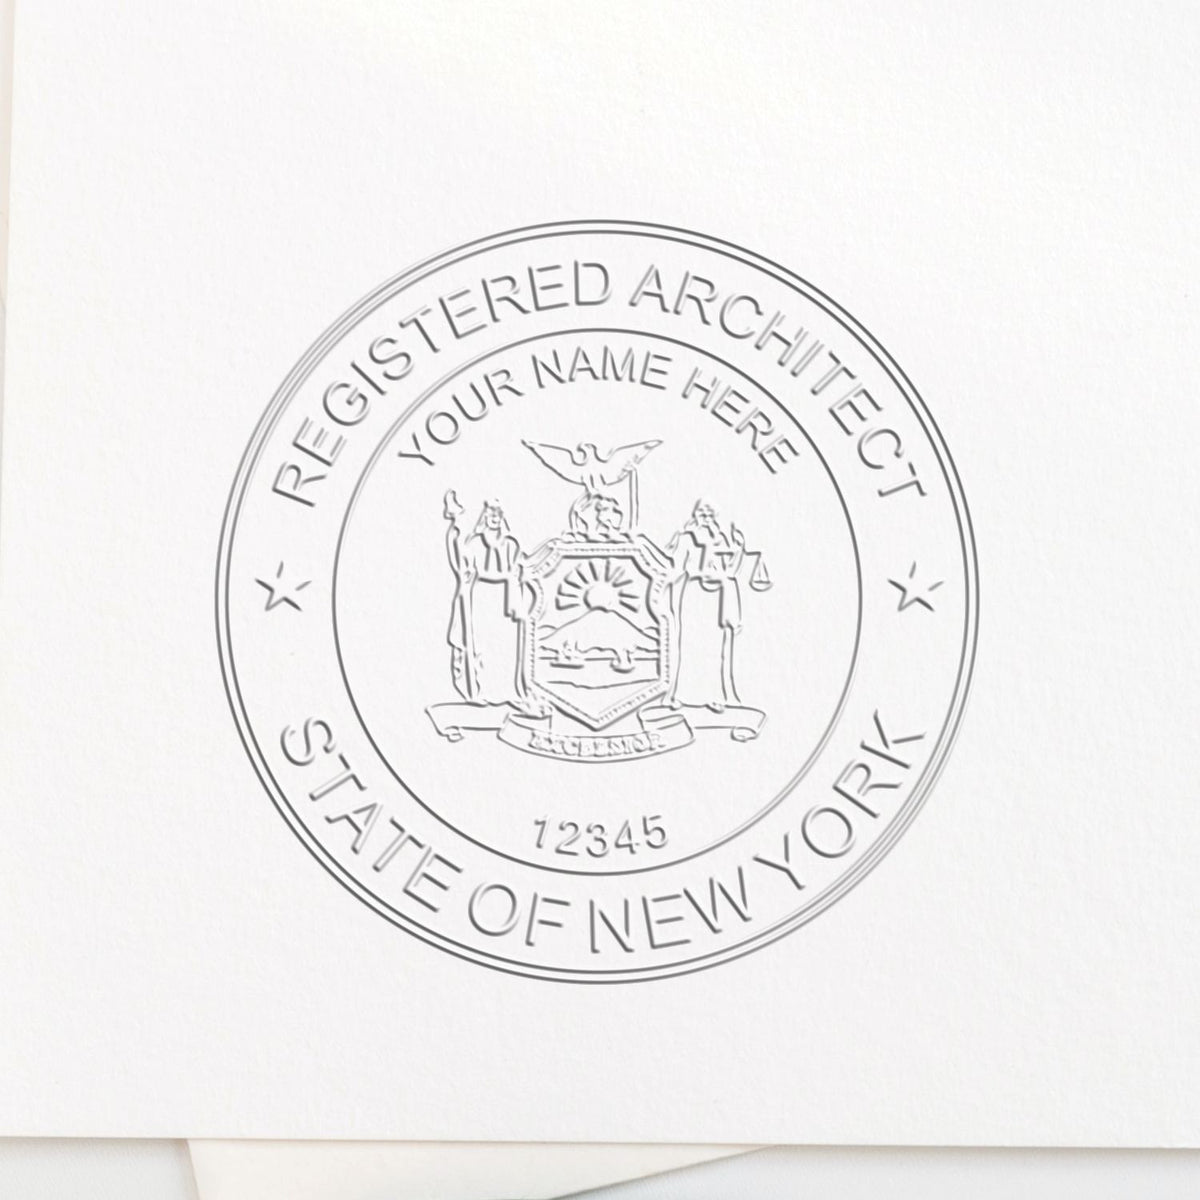 An in use photo of the Hybrid New York Architect Seal showing a sample imprint on a cardstock